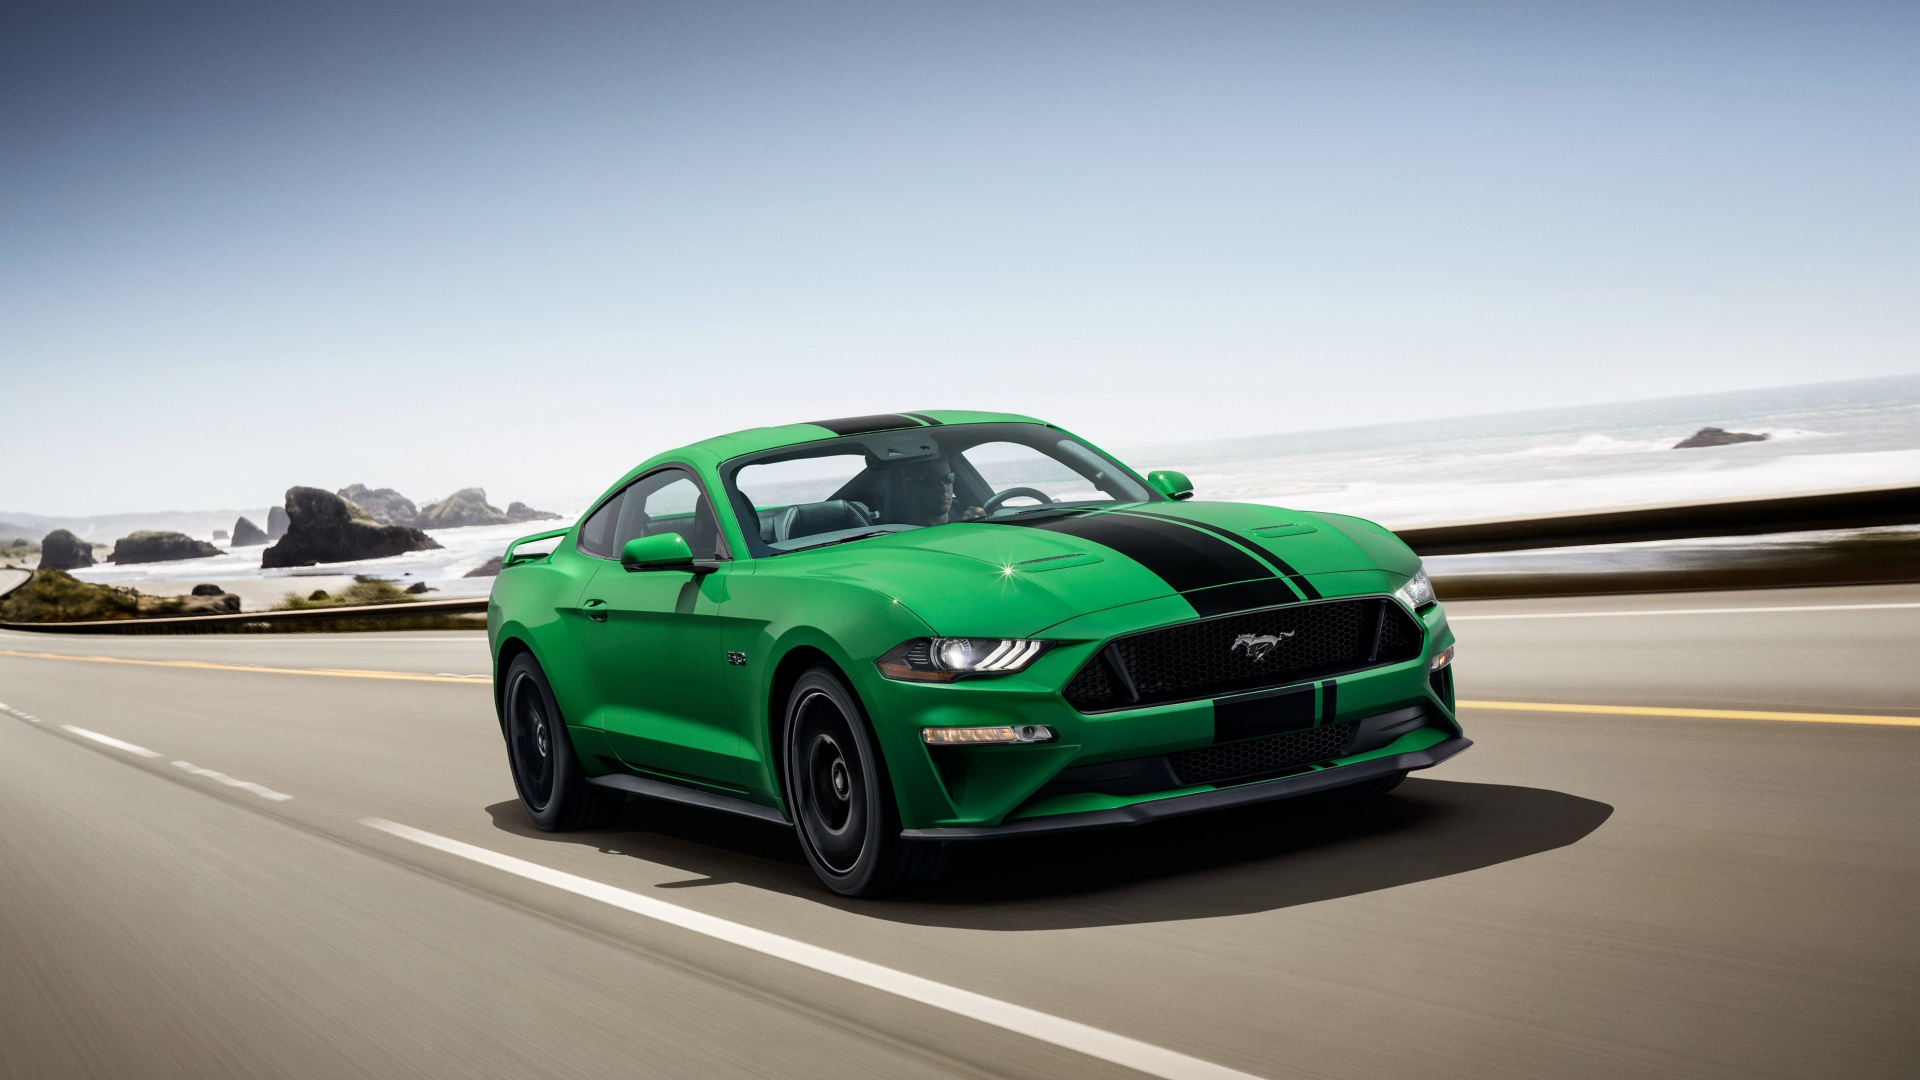 Hd Wallpapers 1080p Cars Mustang 1920x1080